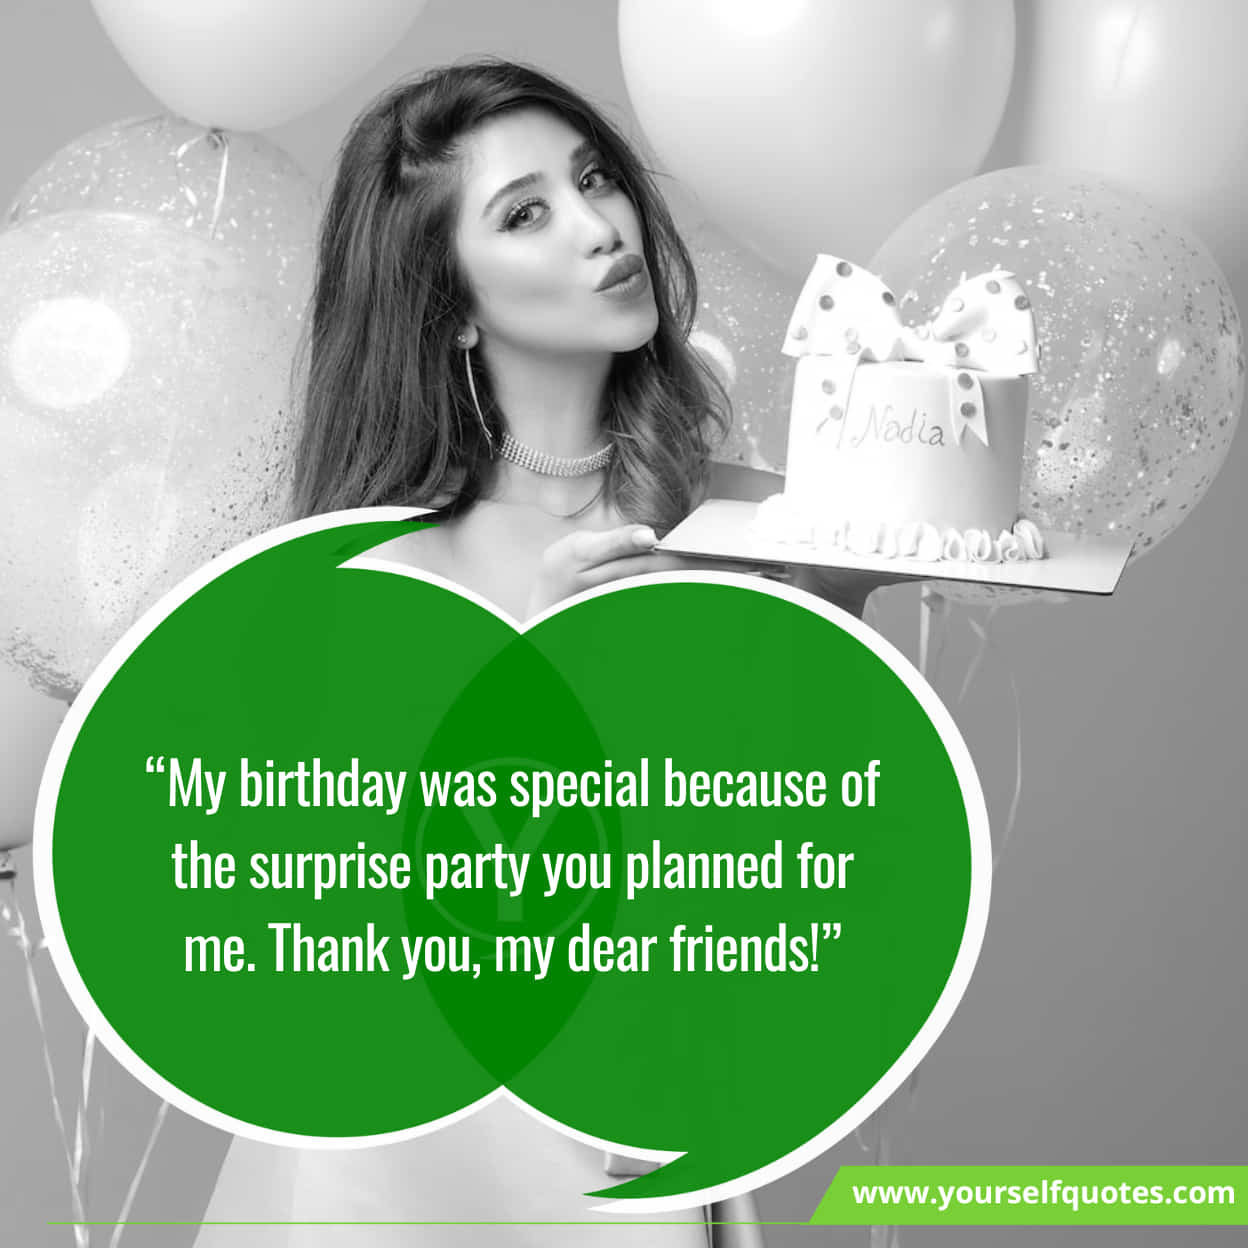 Inspiring Thank You Sayings, Messages for Birthday Surprise